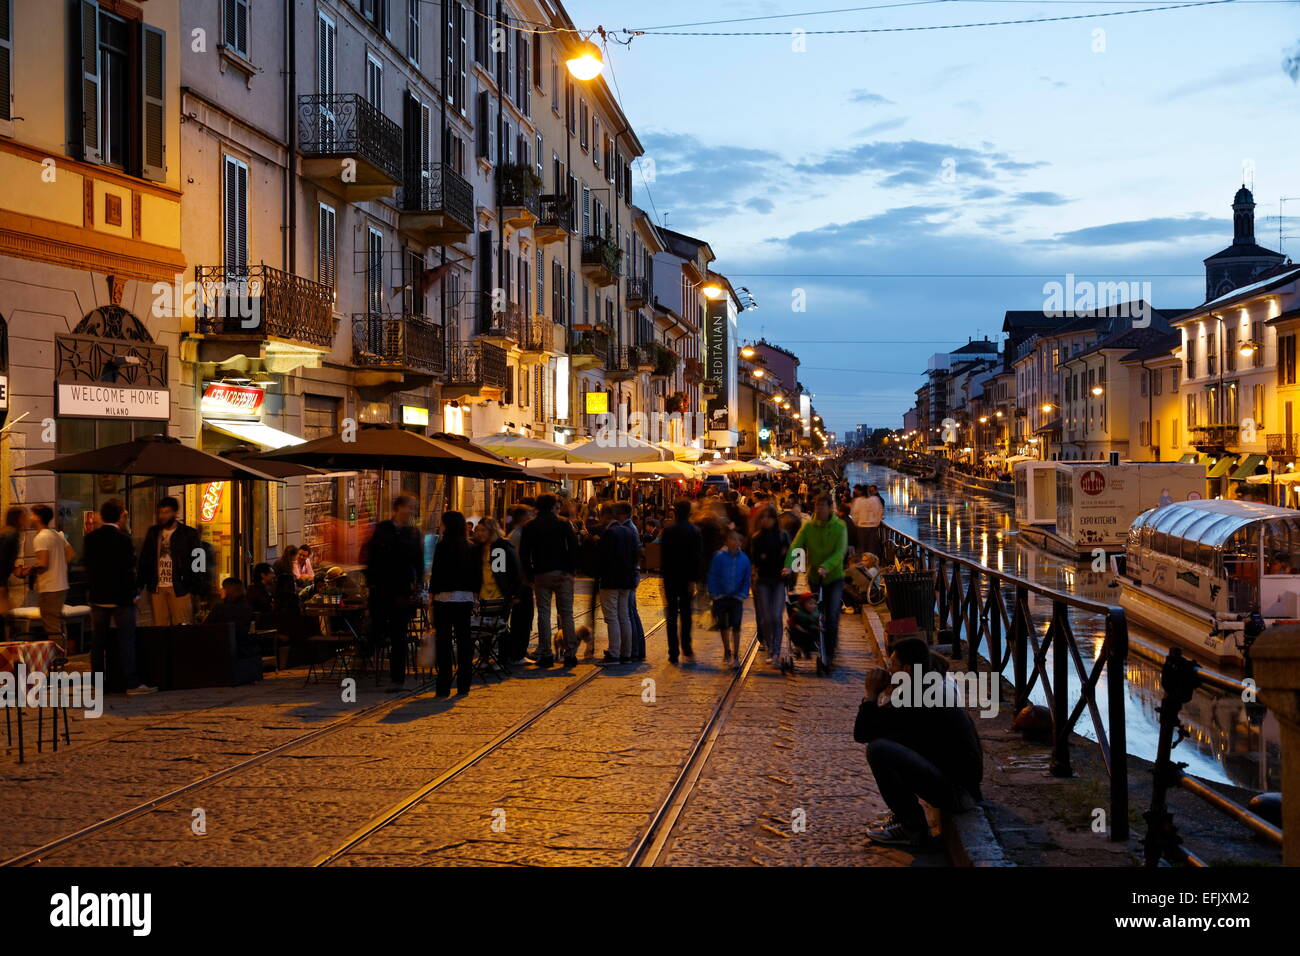 Restaurants and bars along a canal in the evening, Navigli quarter, Milan, Lombardy, Italy Stock Photo